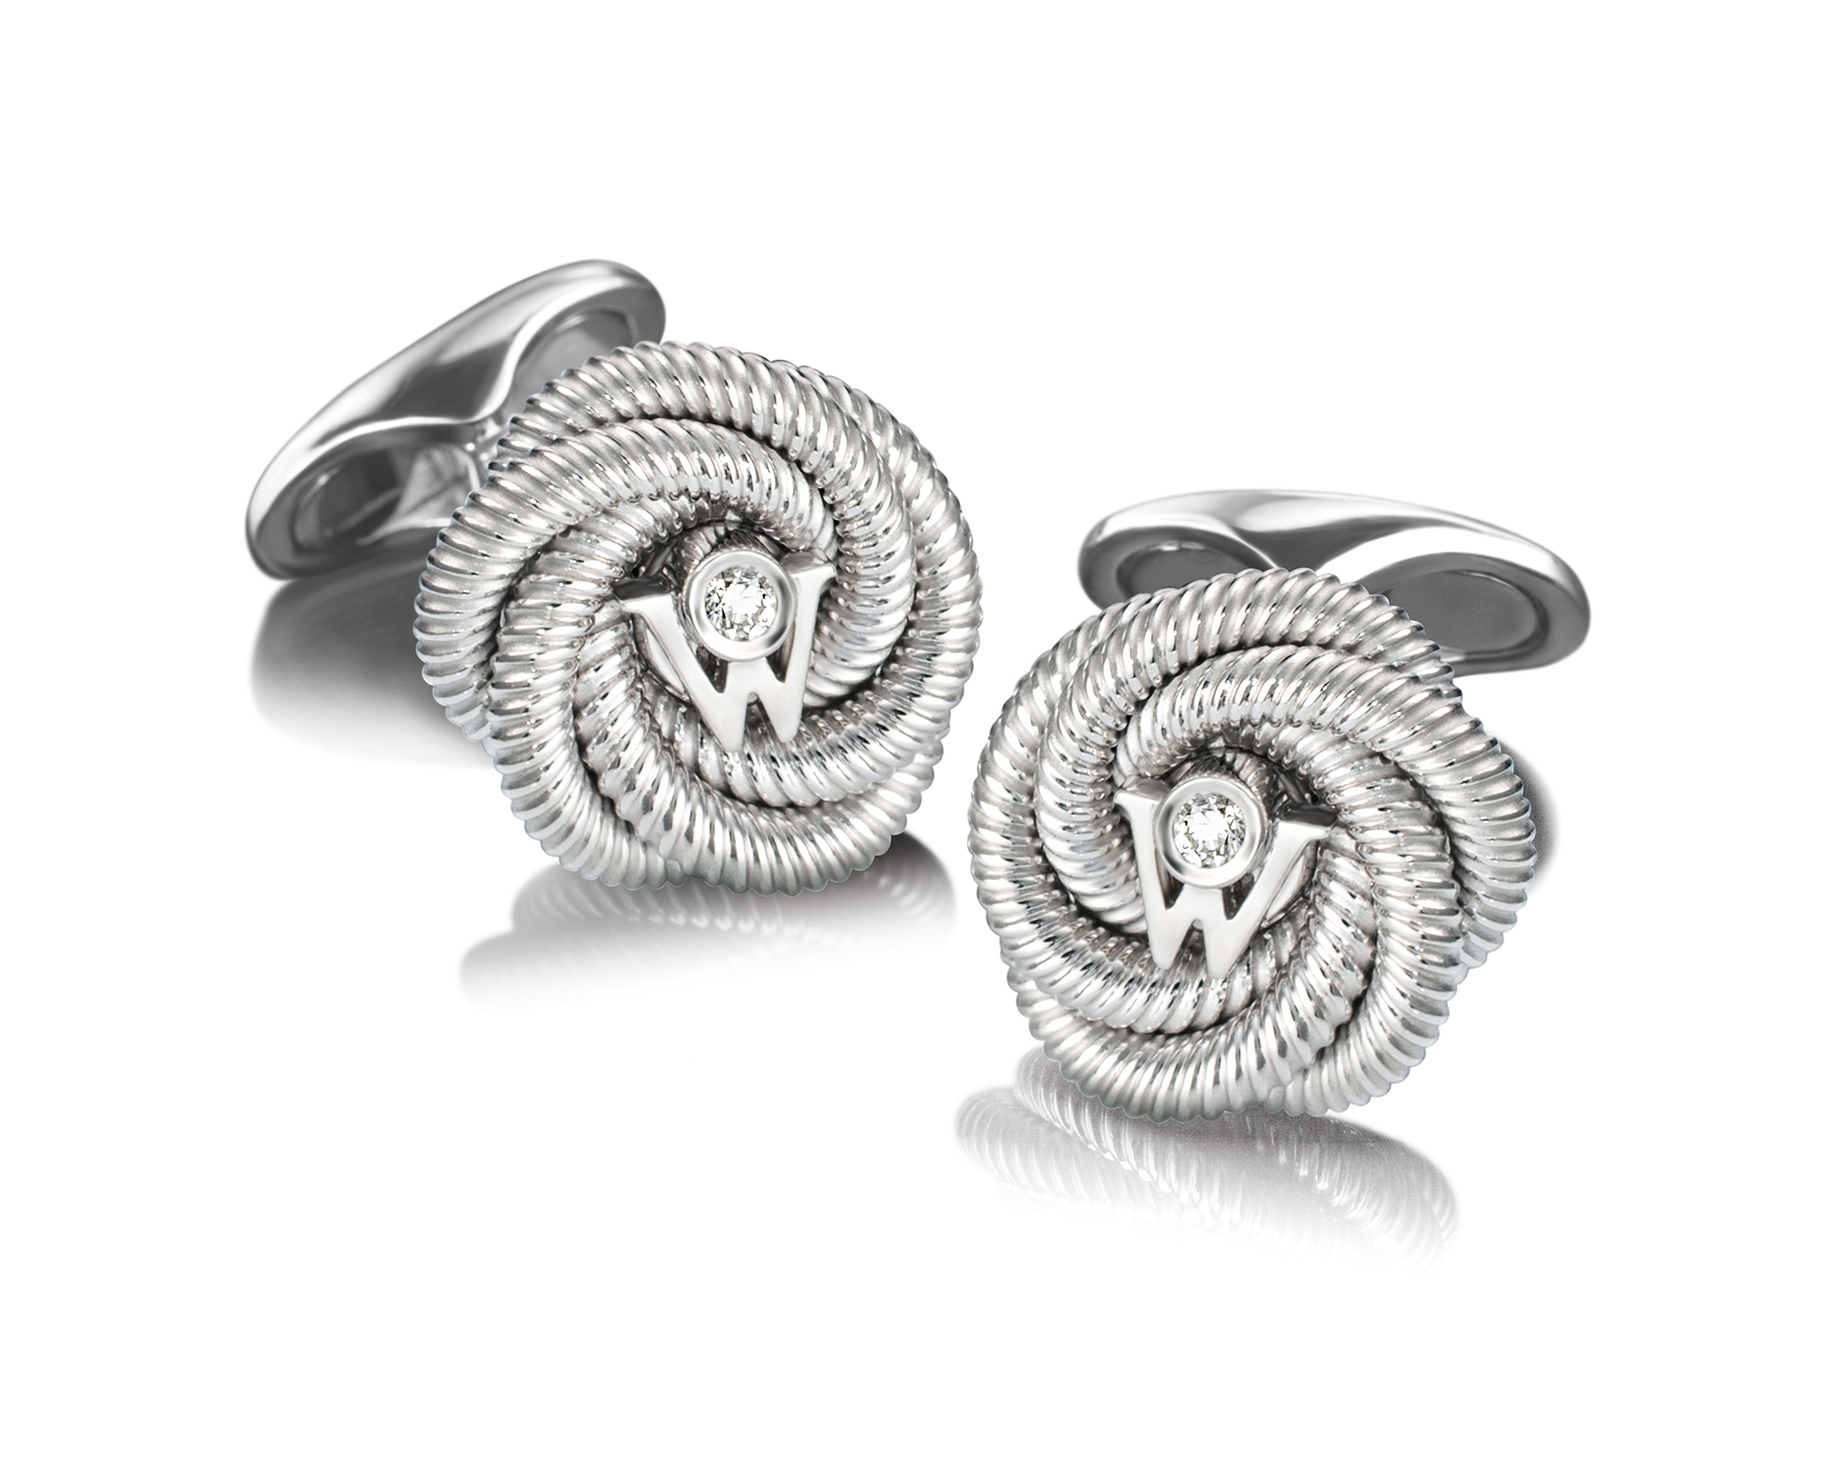 Understatedly elegant, Wellendorff’s Lucky Silken Knot cufflinks (HK$56,000) are perfect for him to wear to the office.